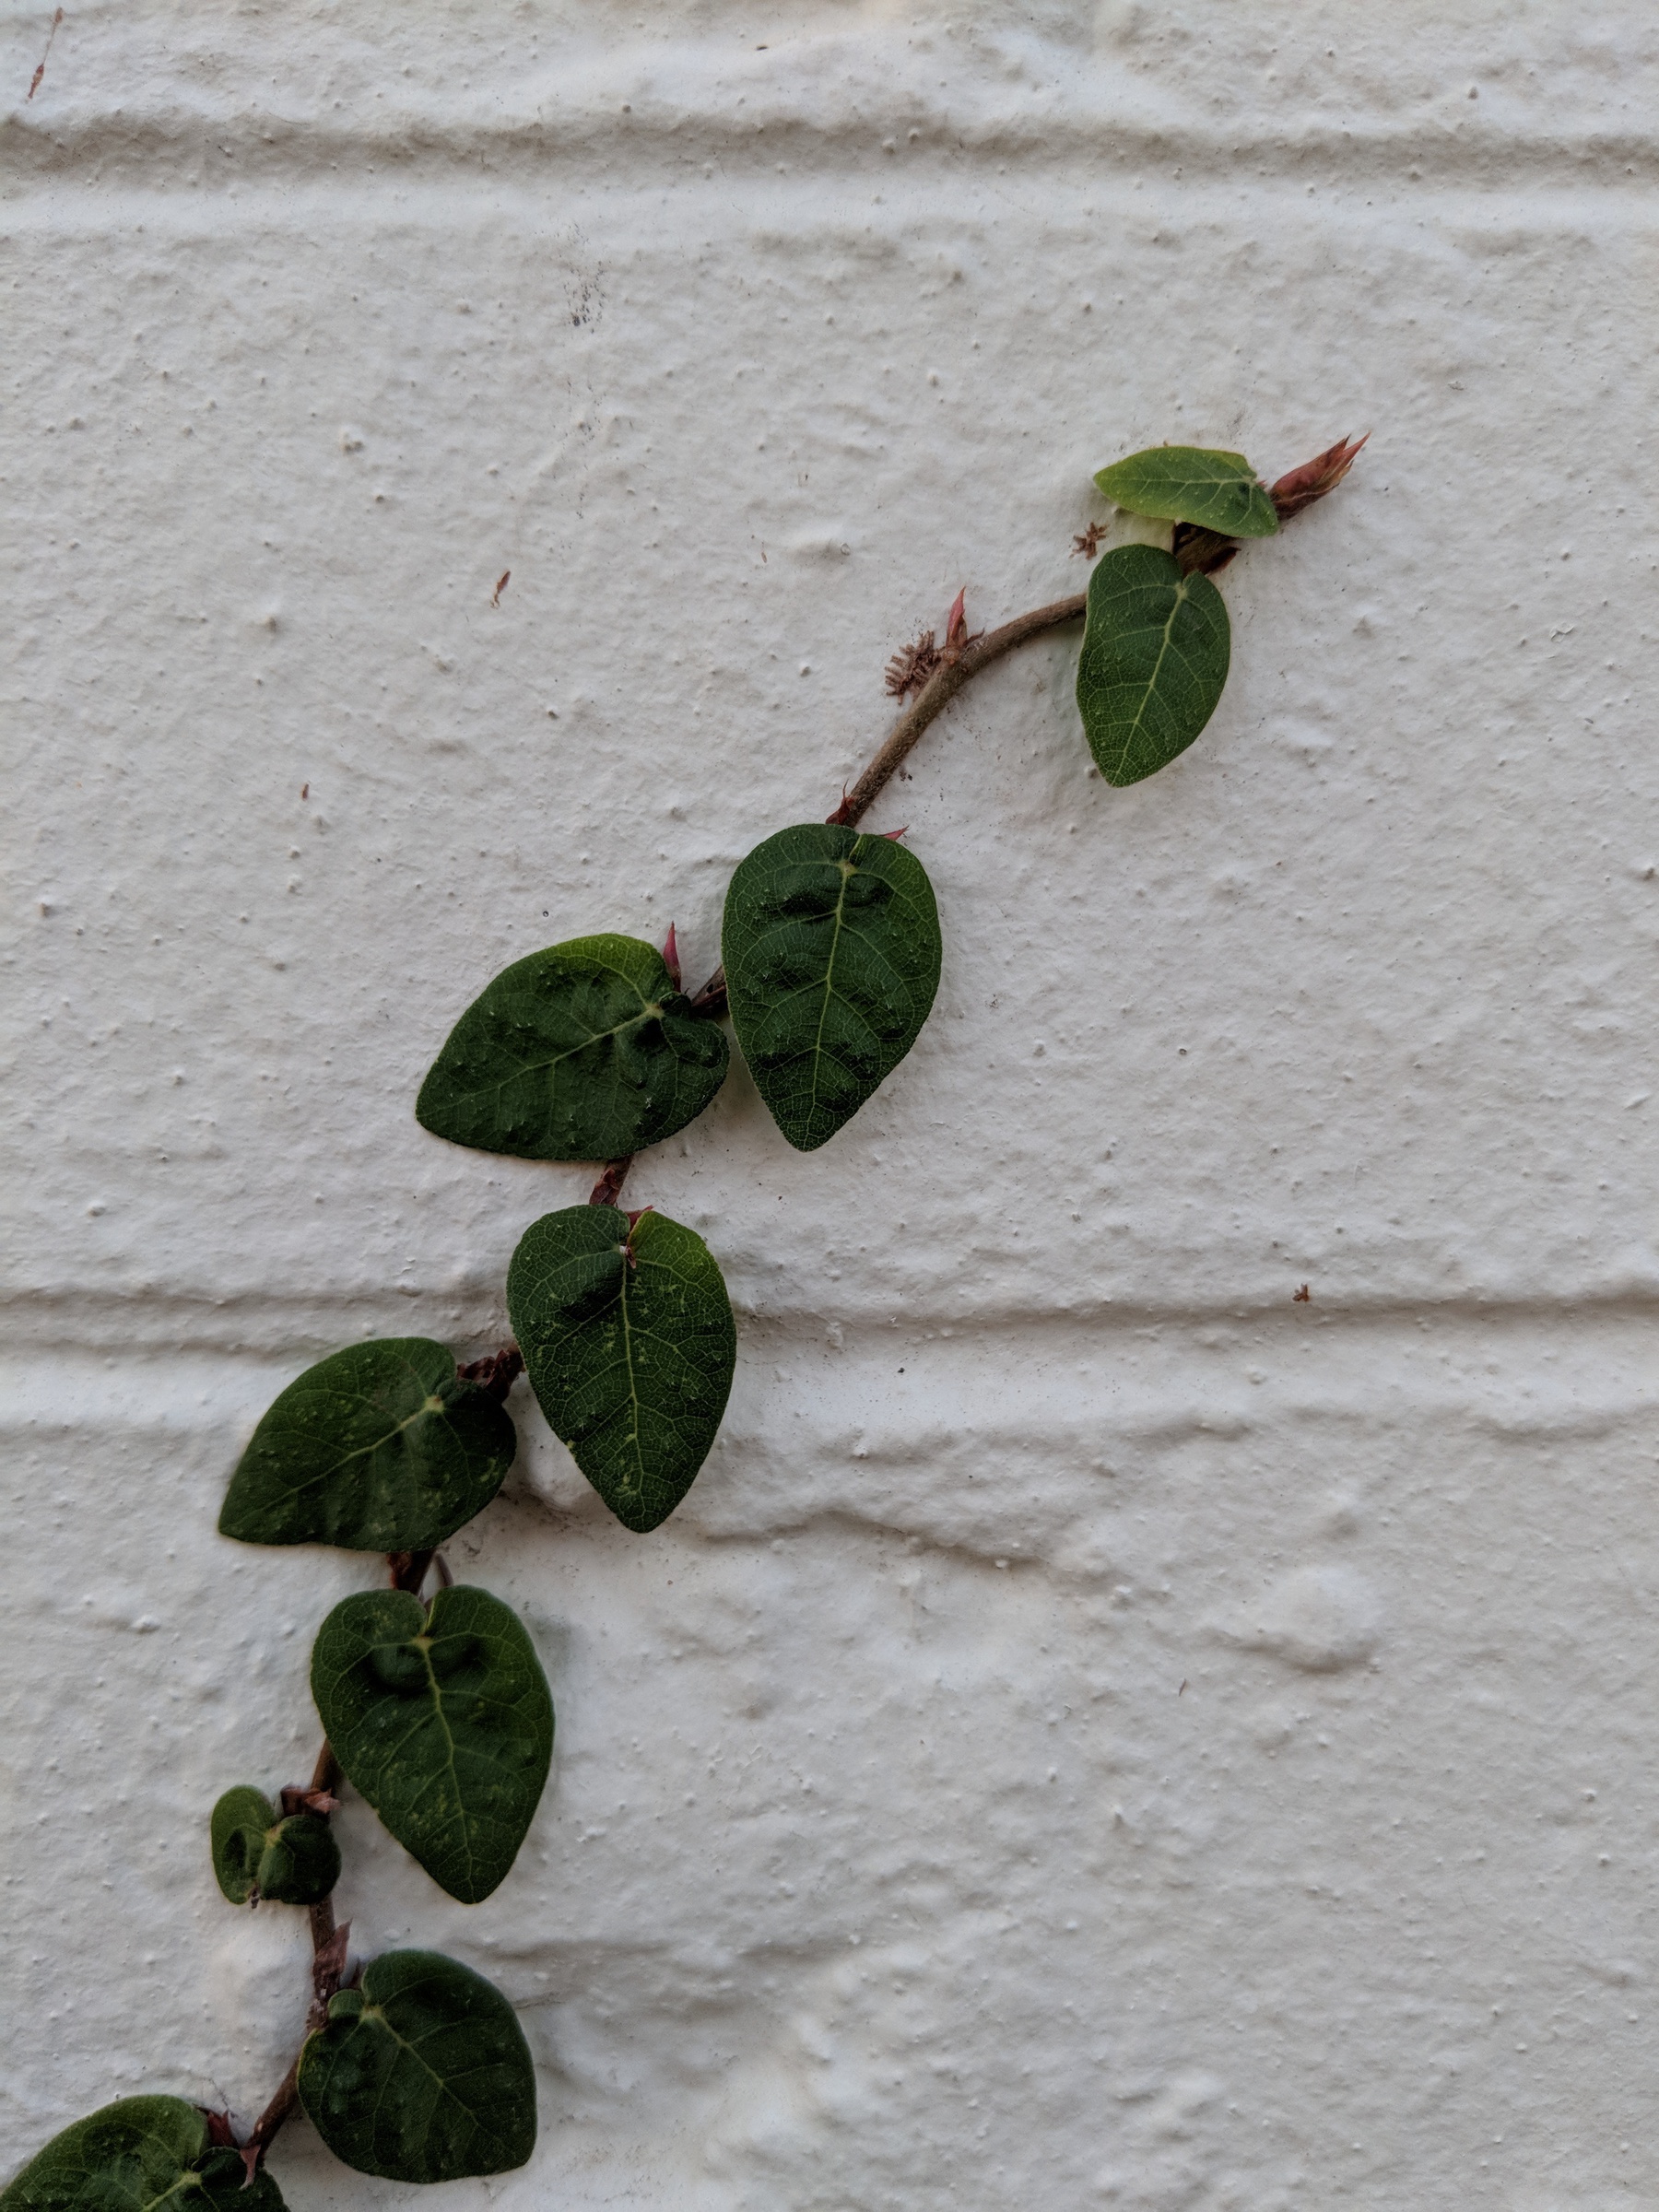 A tendril of vine crawls up the white brick wall. Each green leaf is a heart shape, alternating along the vine.